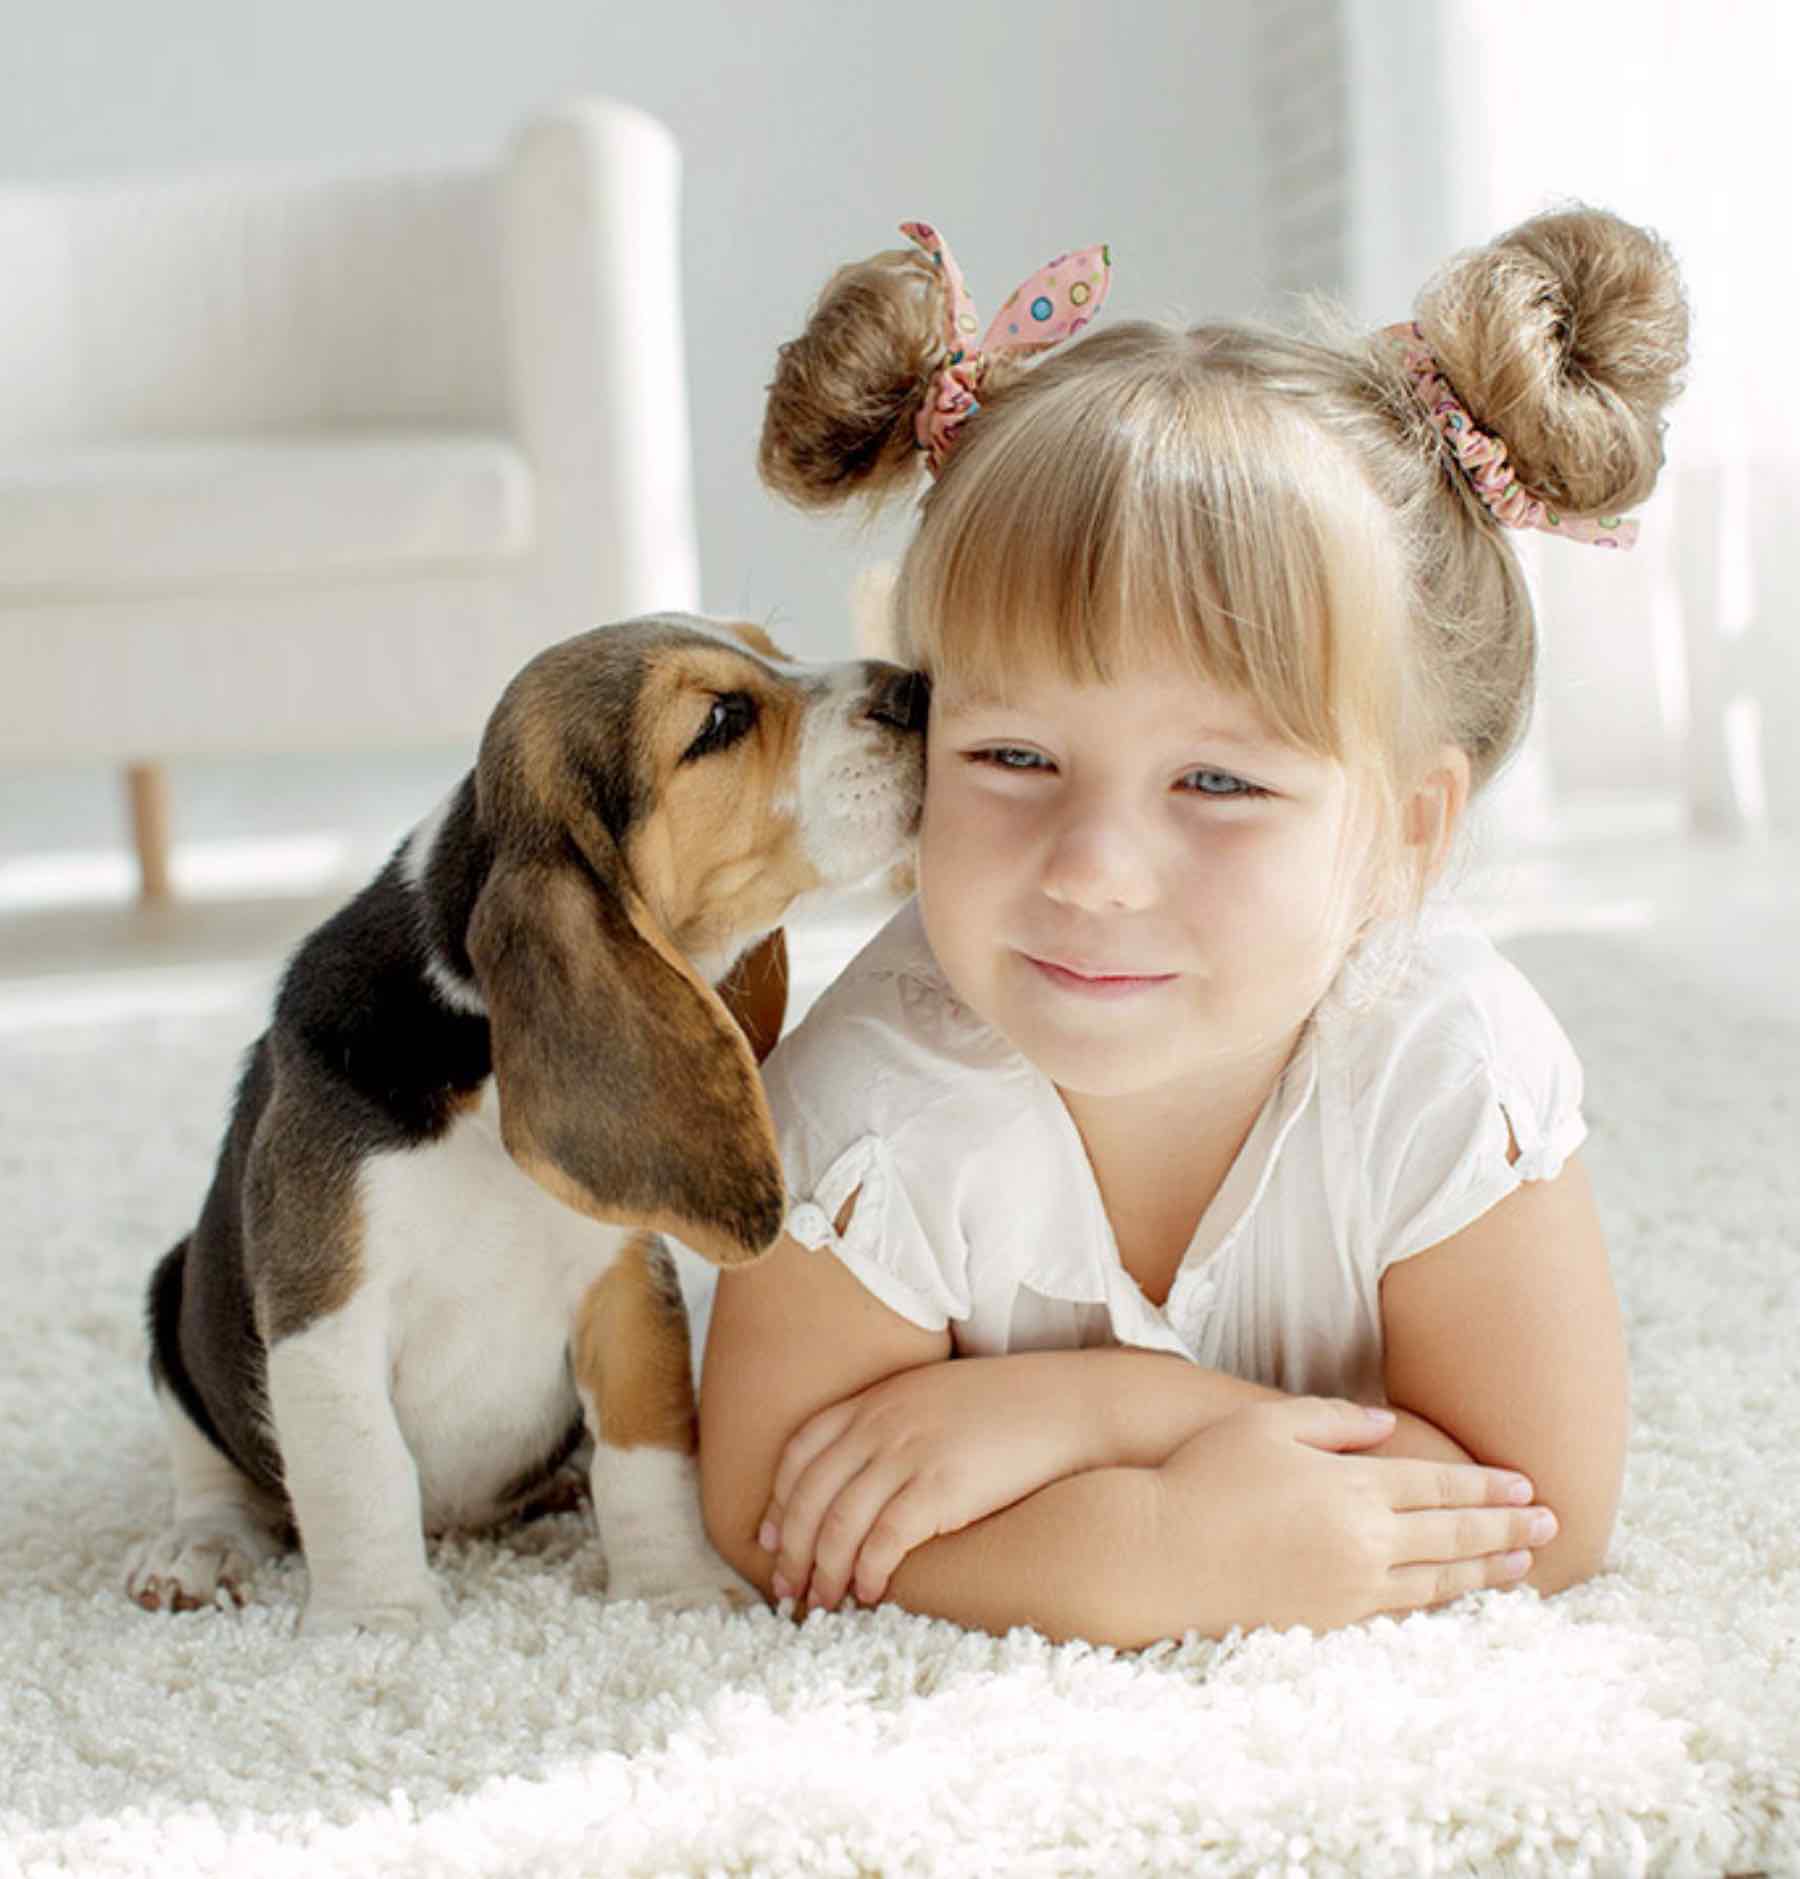 Zerorez has cleaners that are especially sensitive for kids and pets.